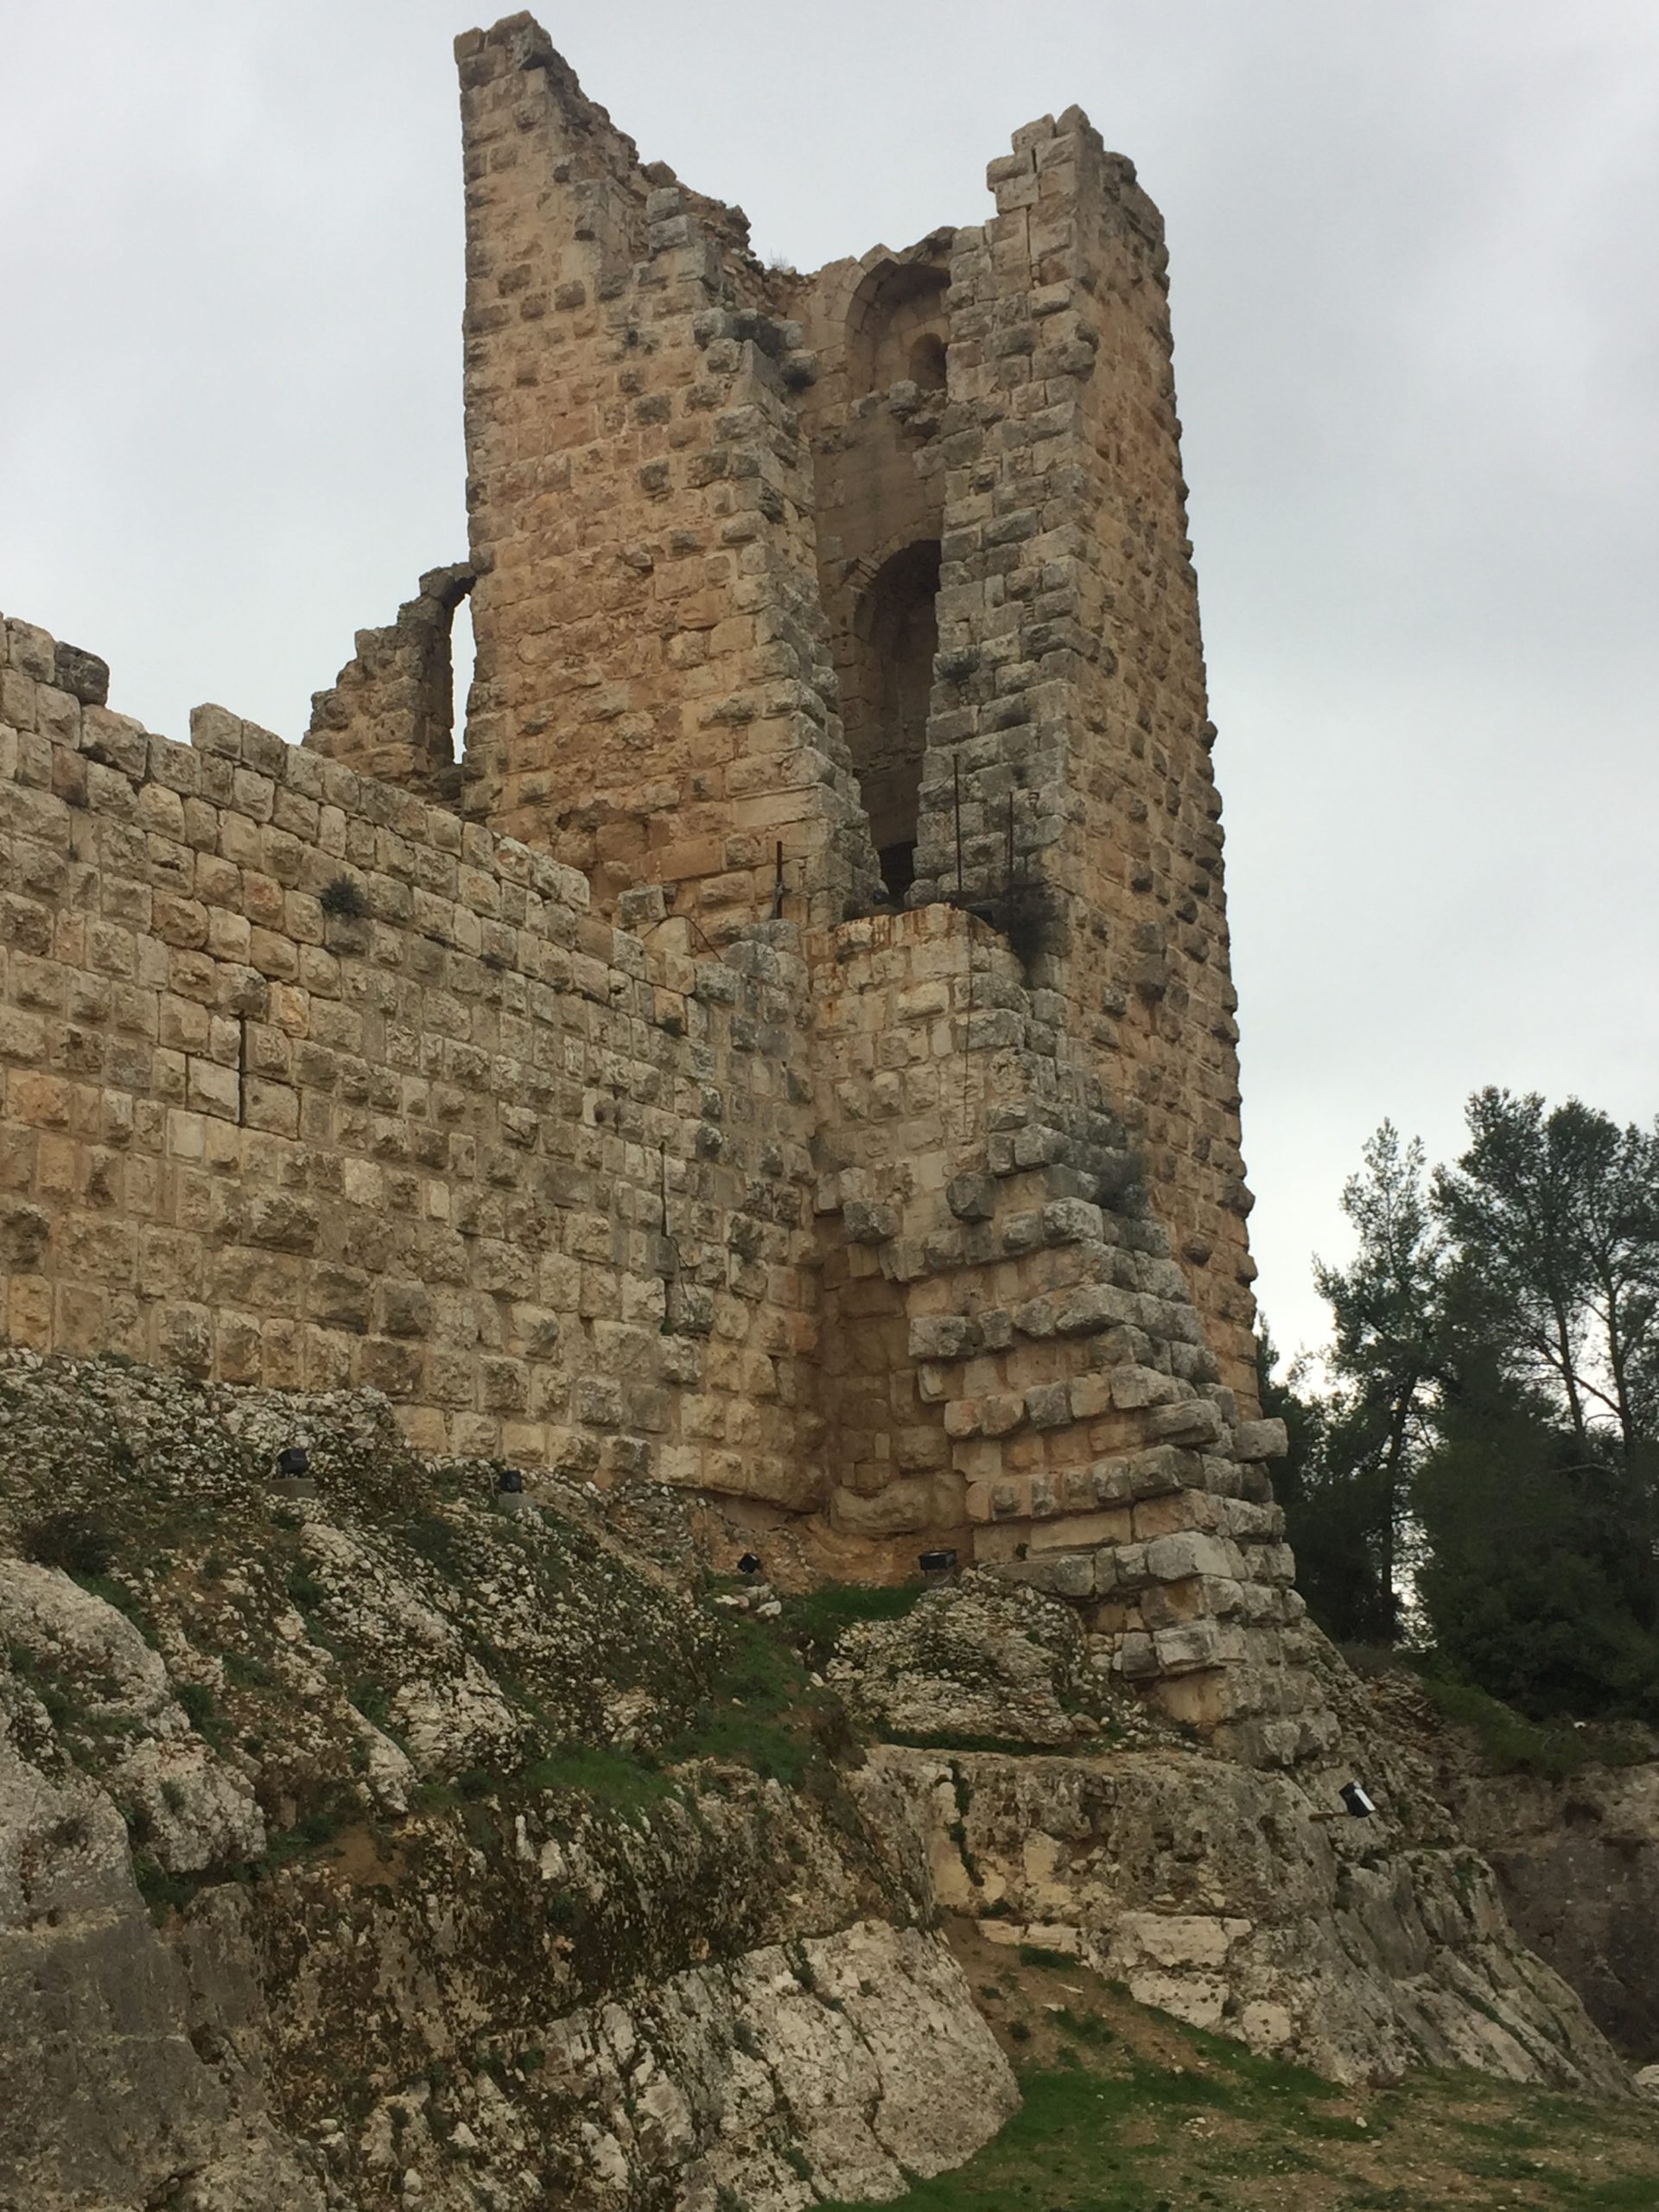 A tower in Ajlun castle